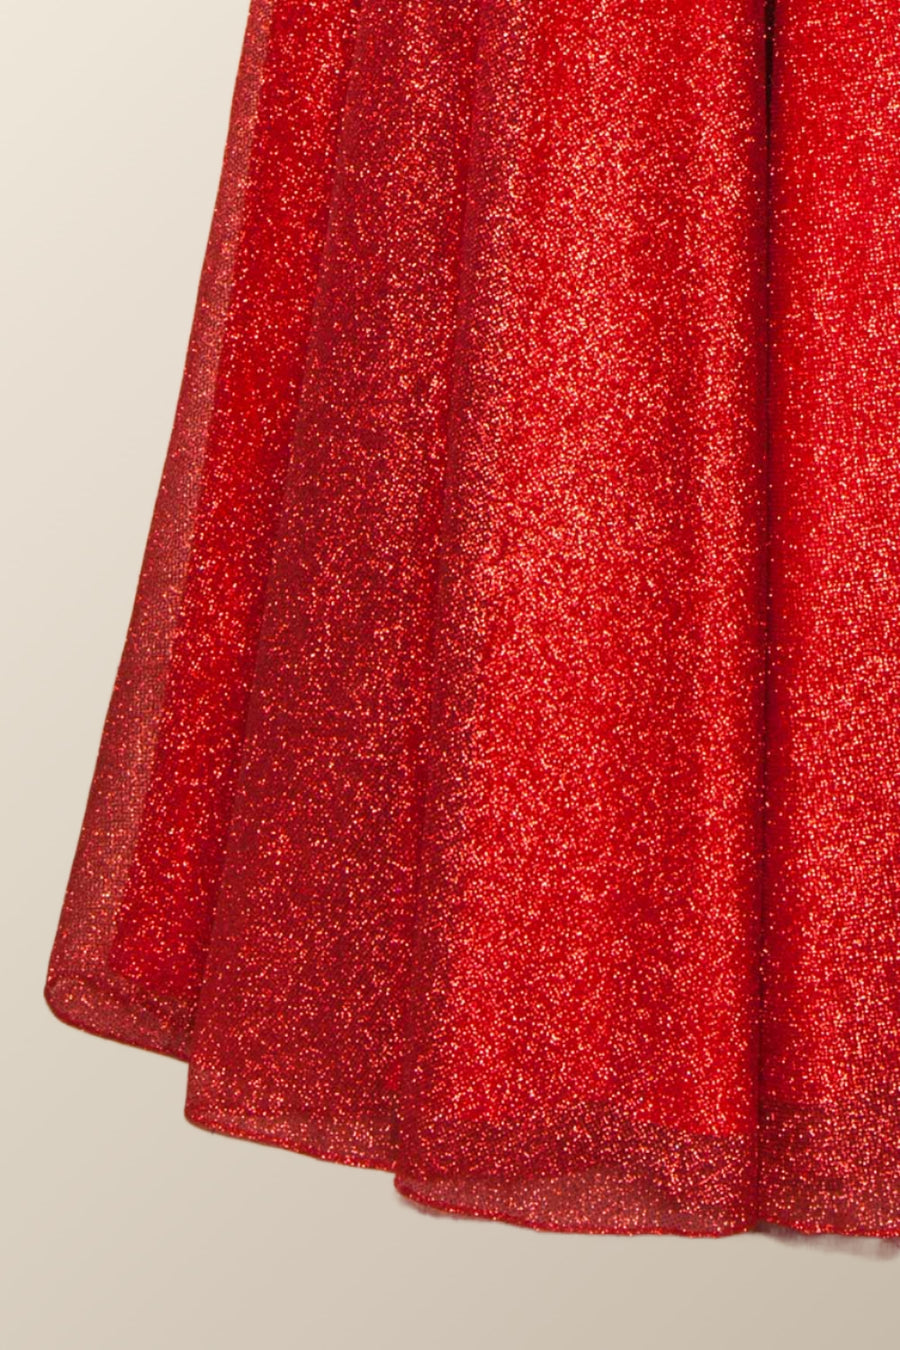 Cowl Neck Red A-line Long Formal Dress